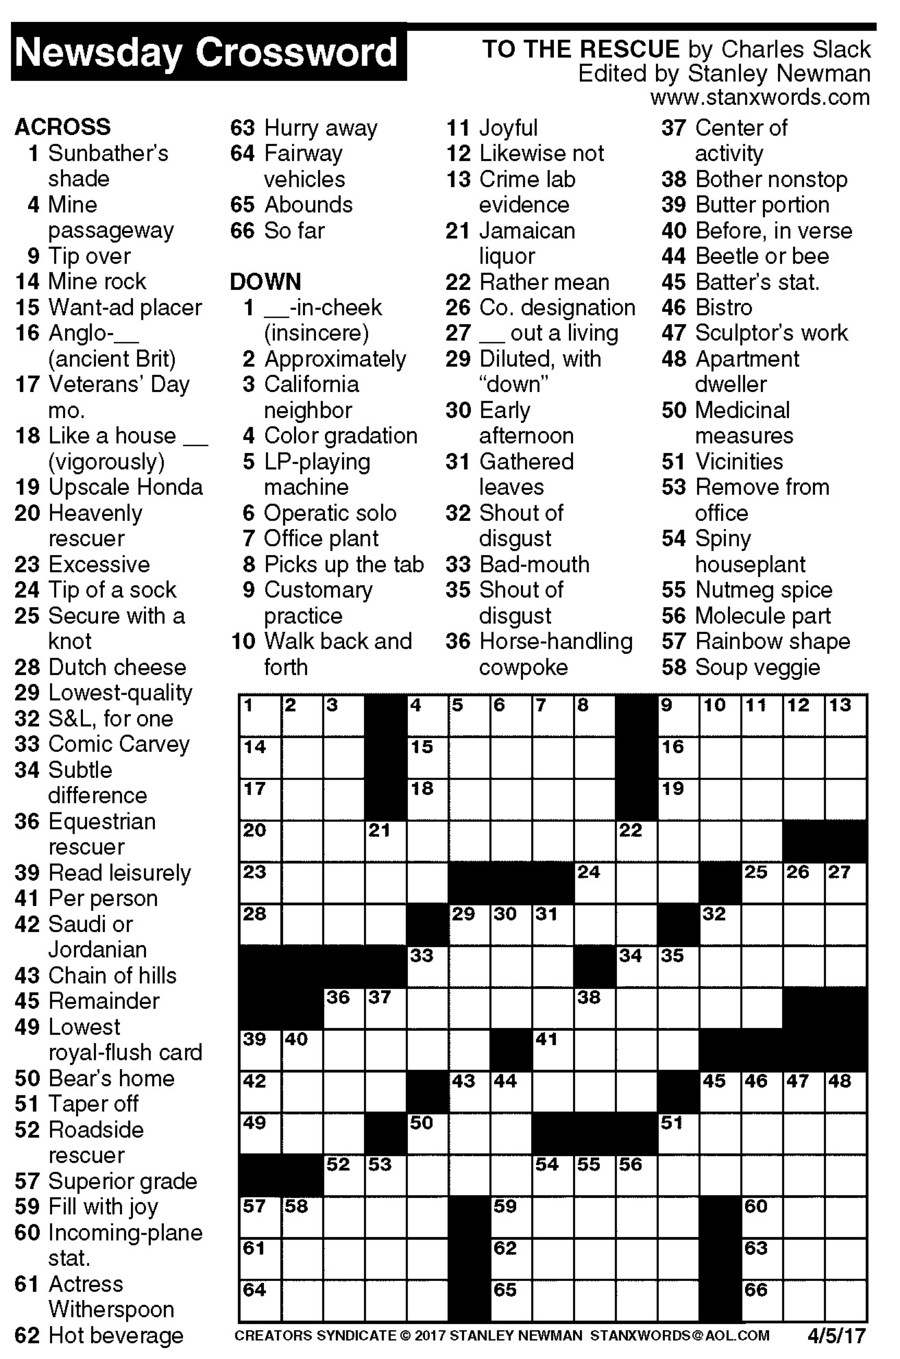 Newsday Crossword Puzzle For Apr 05, 2017,stanley Newman - Printable Crossword Puzzles Newsday